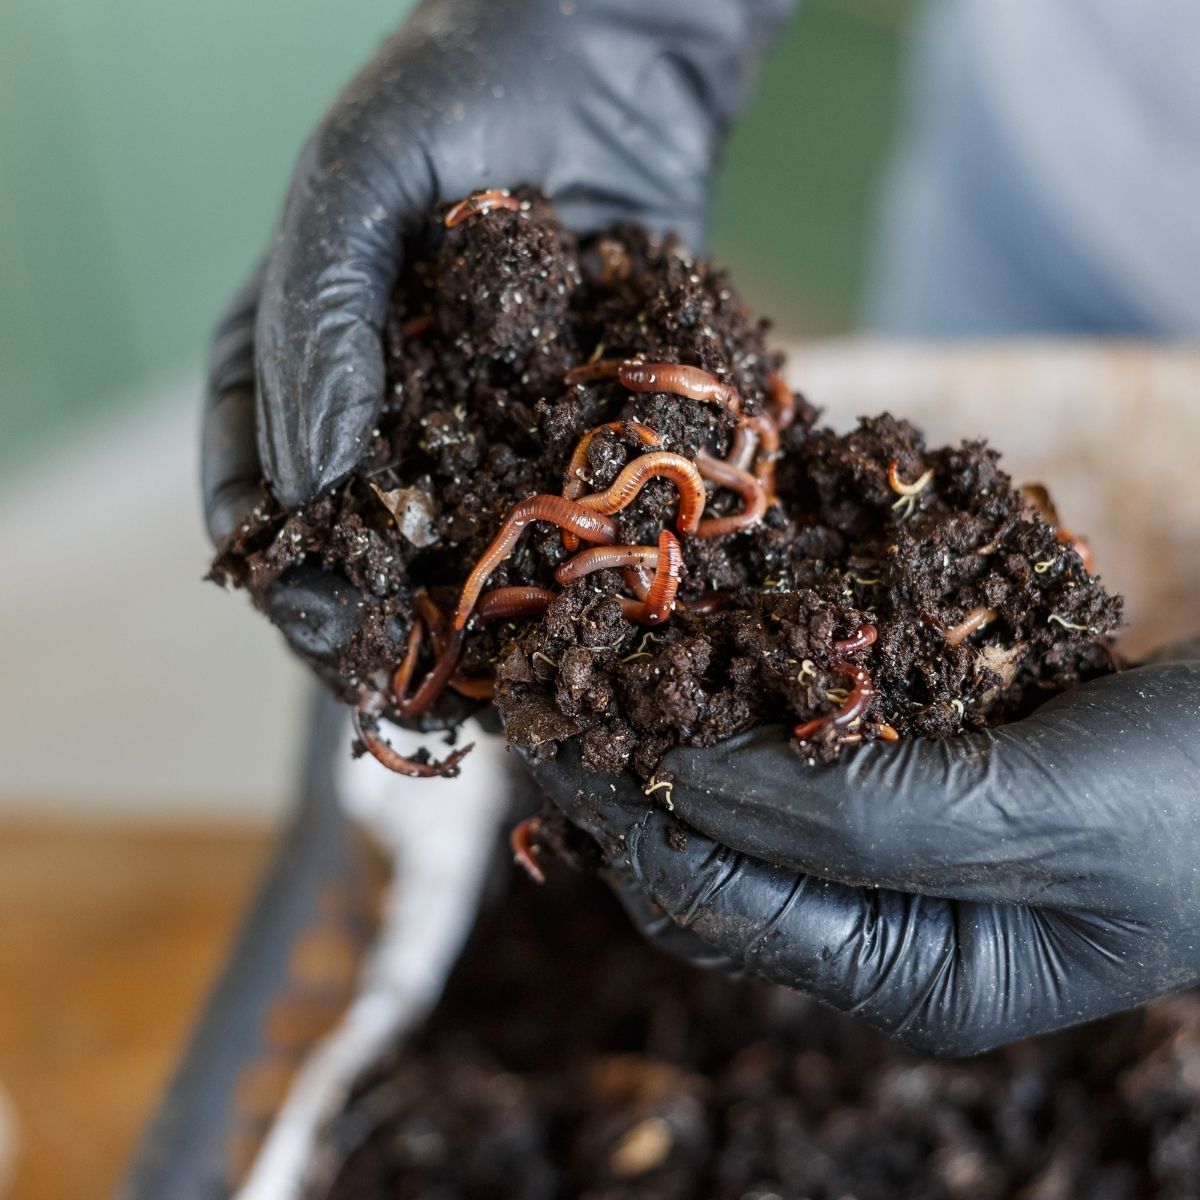 vermicomposting - hands holding worms and compost